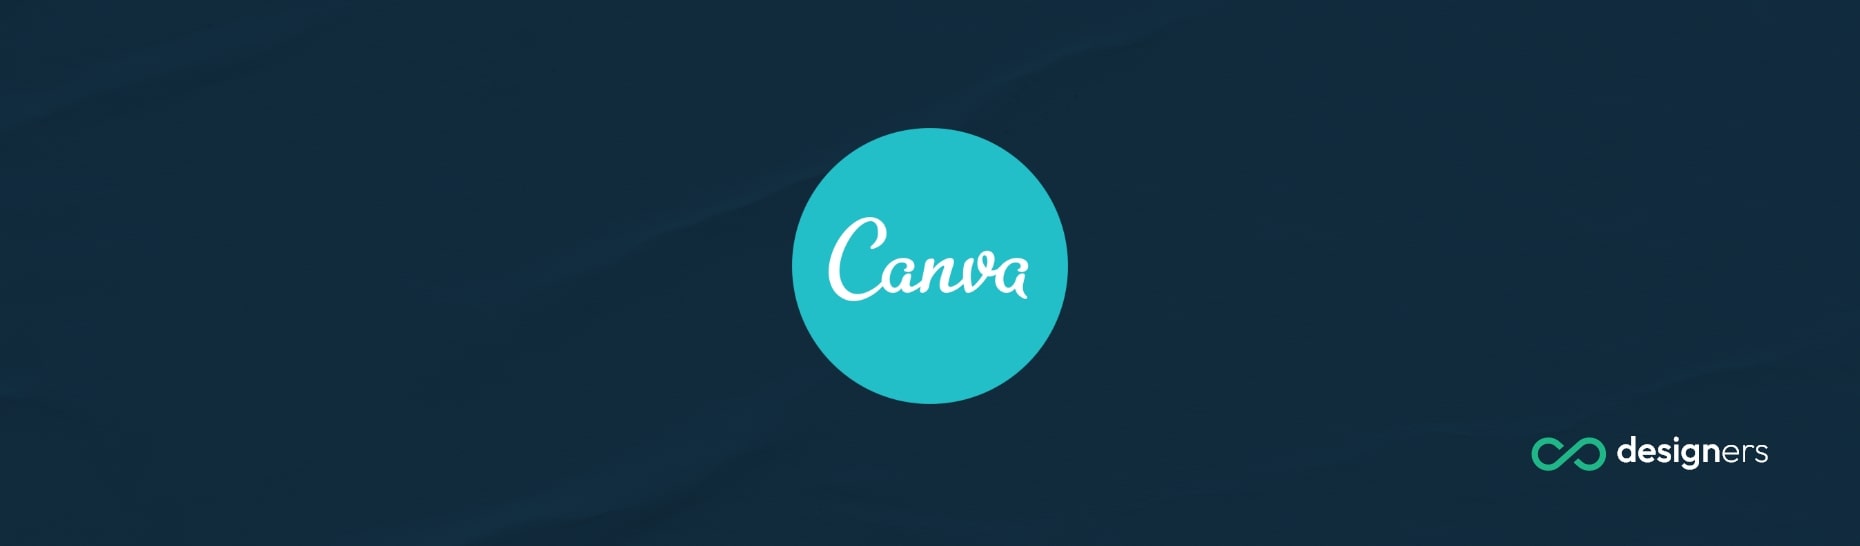 How Do You Draw a Curved Line in Canva? 